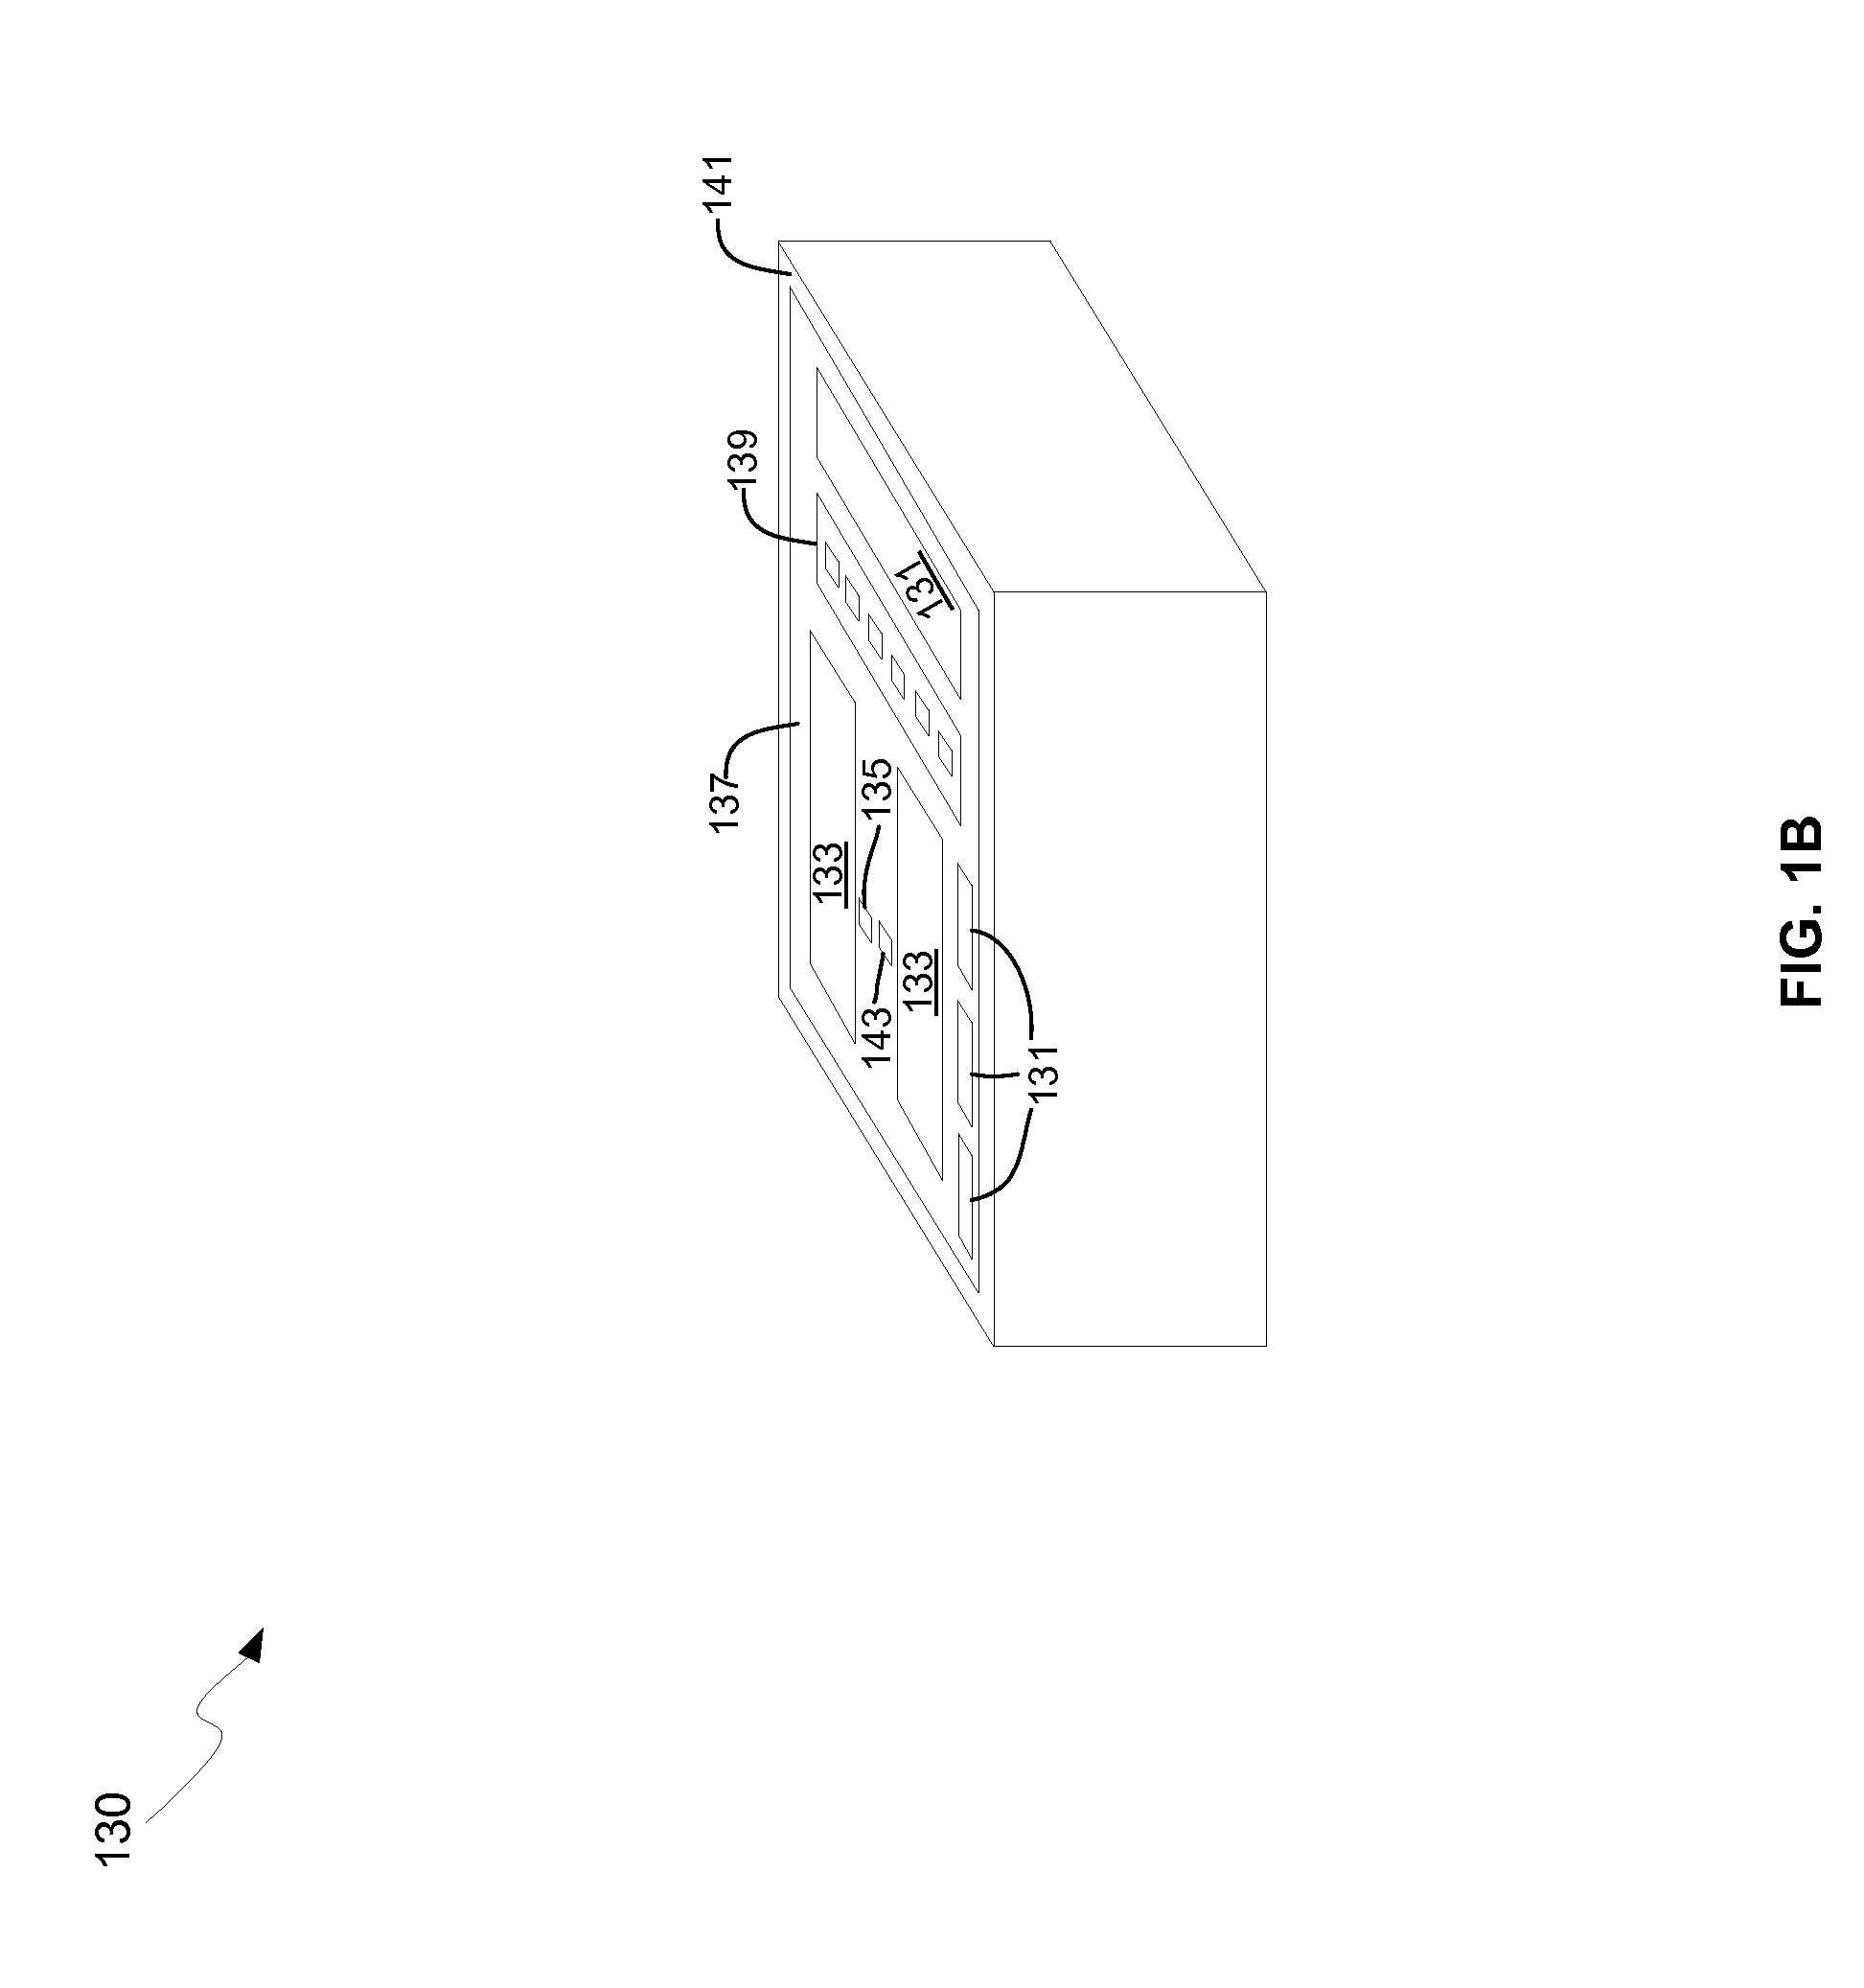 Method And System For A Silicon-Based Optical Phase Modulator With High Modal Overlap